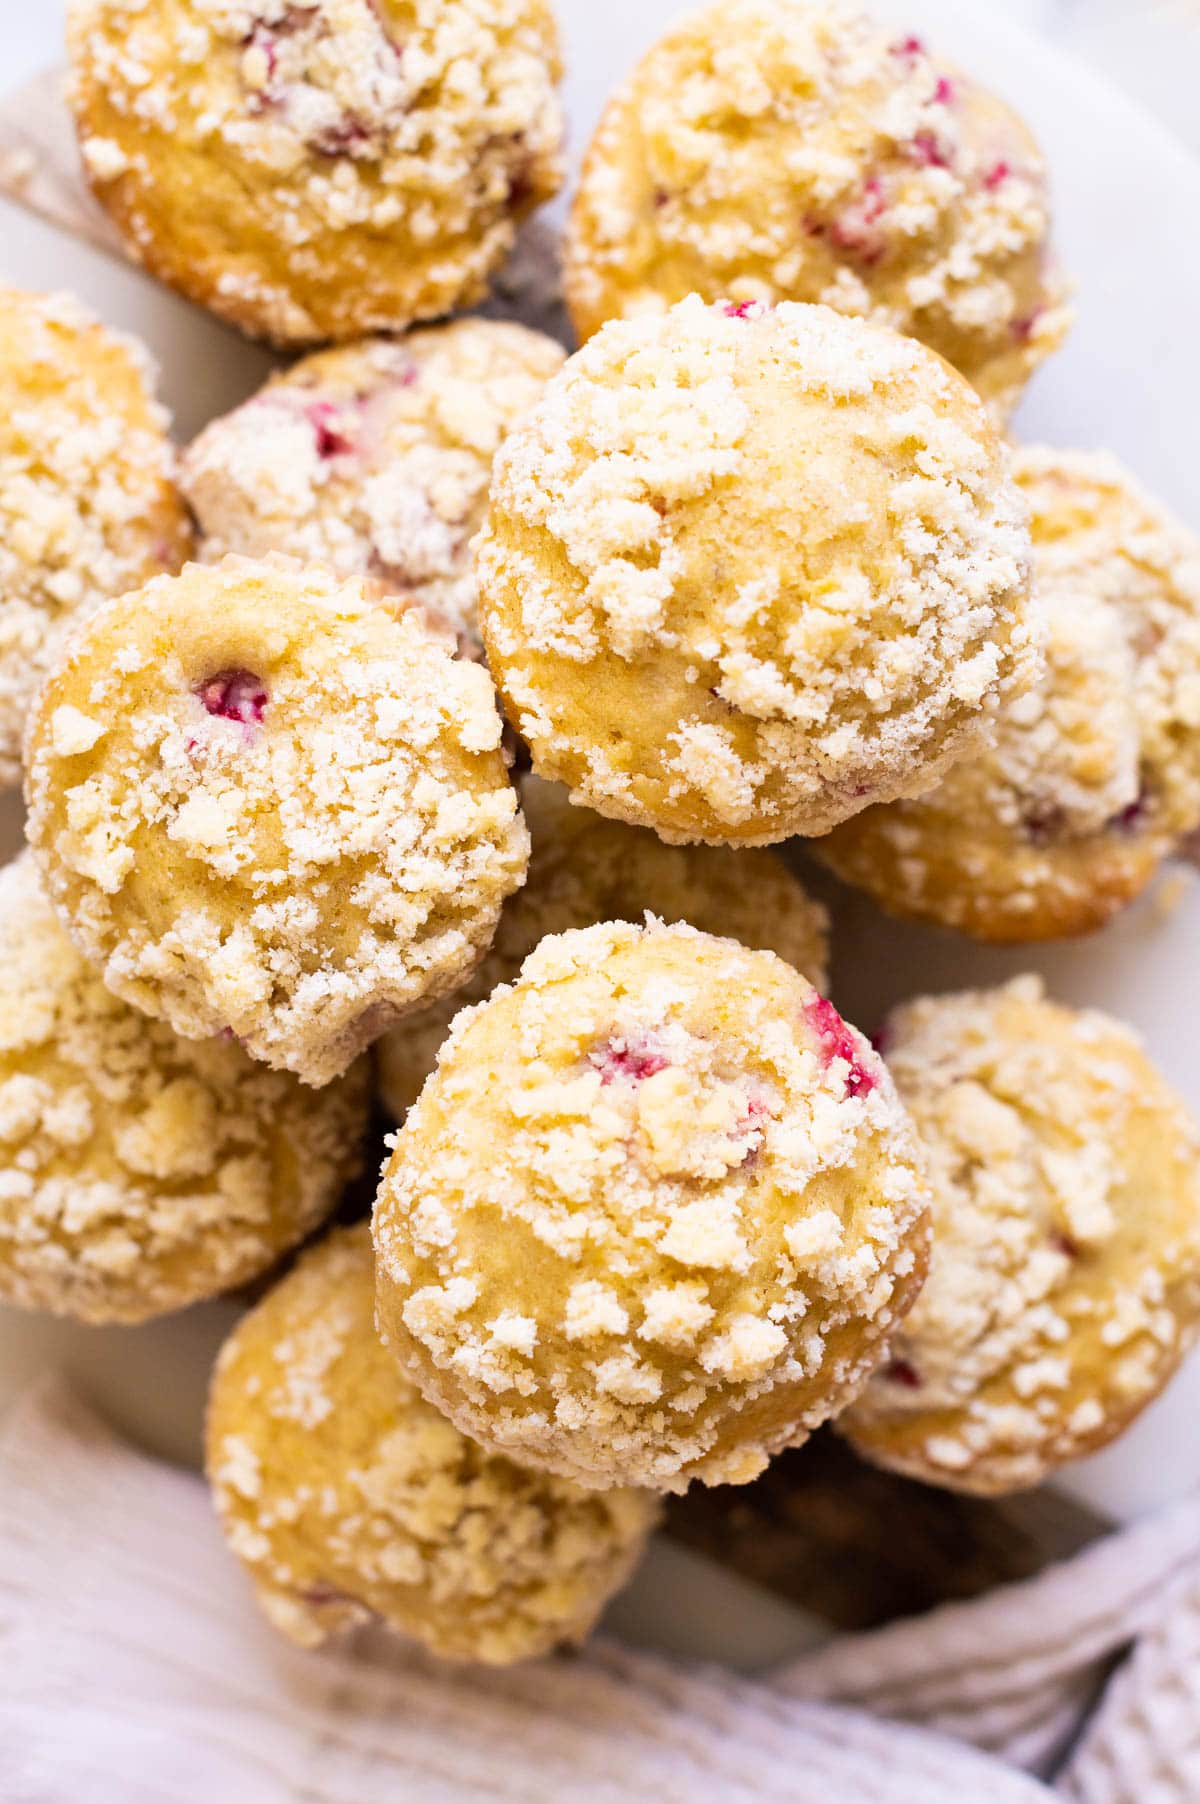 Raspberry muffins with streusel topping in a stack on a serving platter.